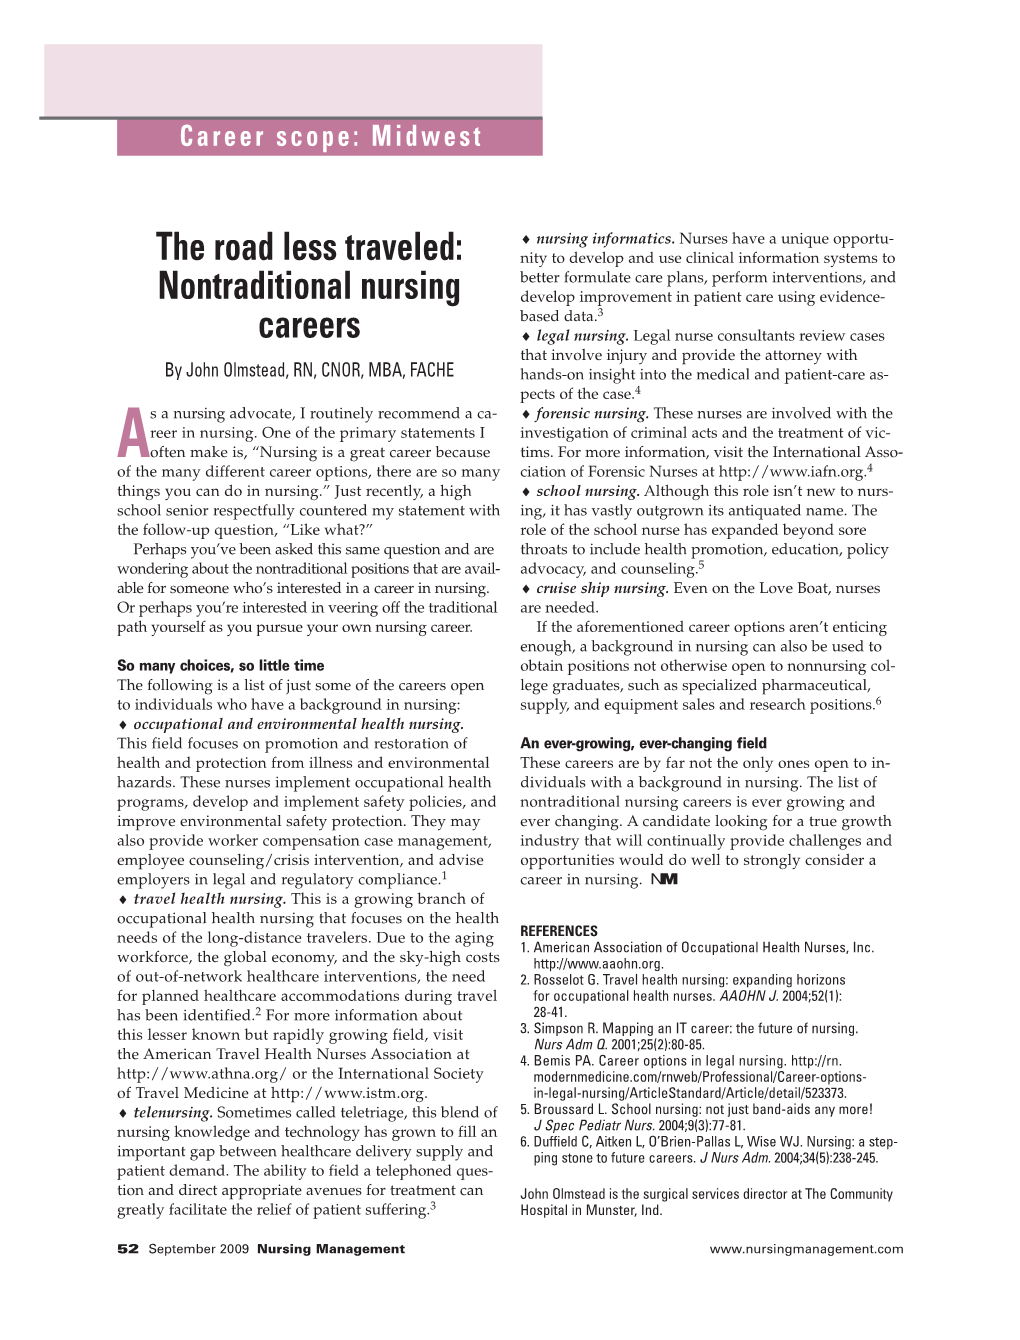 The Road Less Traveled: Nontraditional Nursing Careers